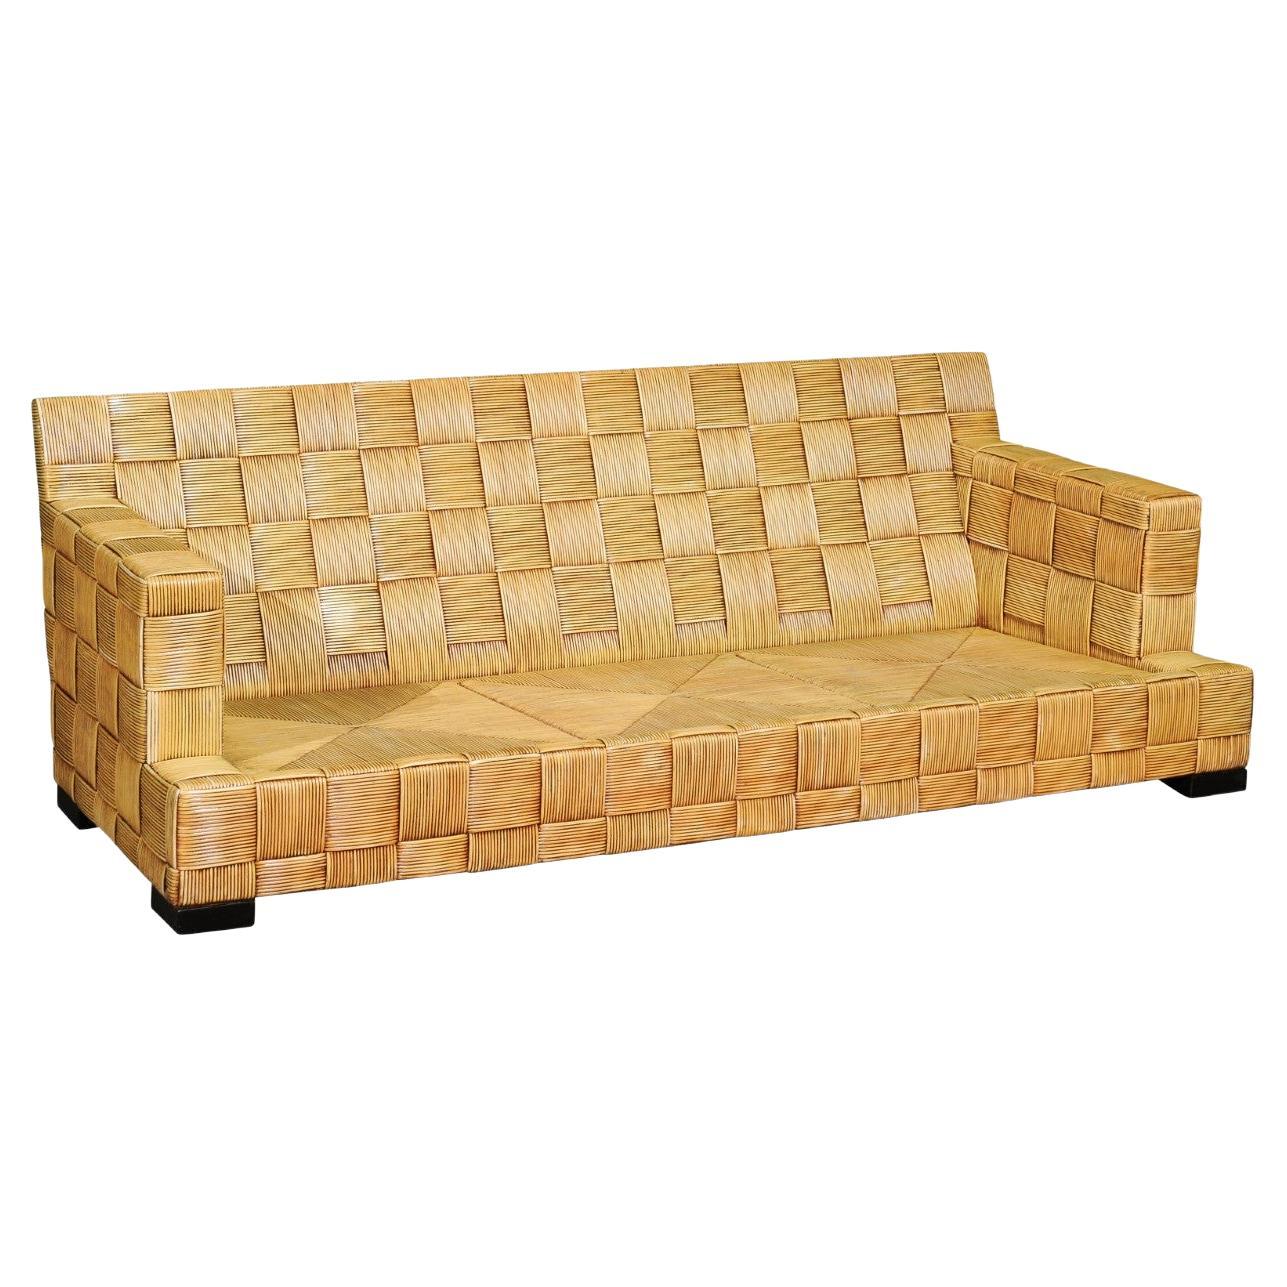 Stellar Block Island Collection Cane Sofa by Hutton for Donghia - Pair Available For Sale